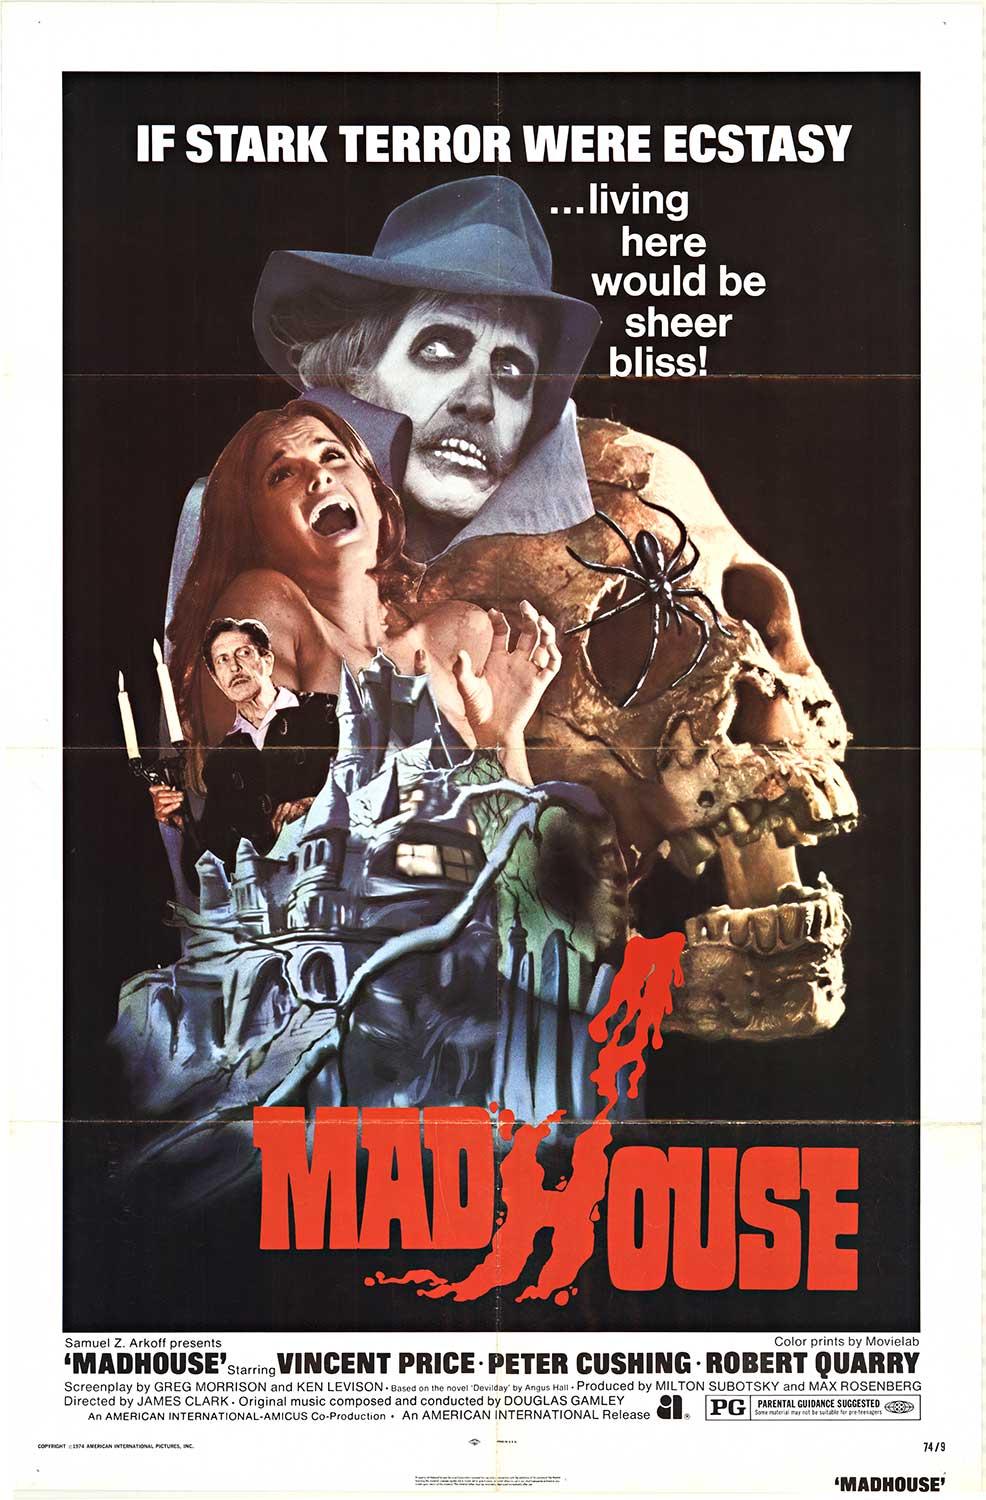 Unknown Figurative Print - Original 1974 "Madhouse" vintage 1-sheet movie poster.   NSS 74/9